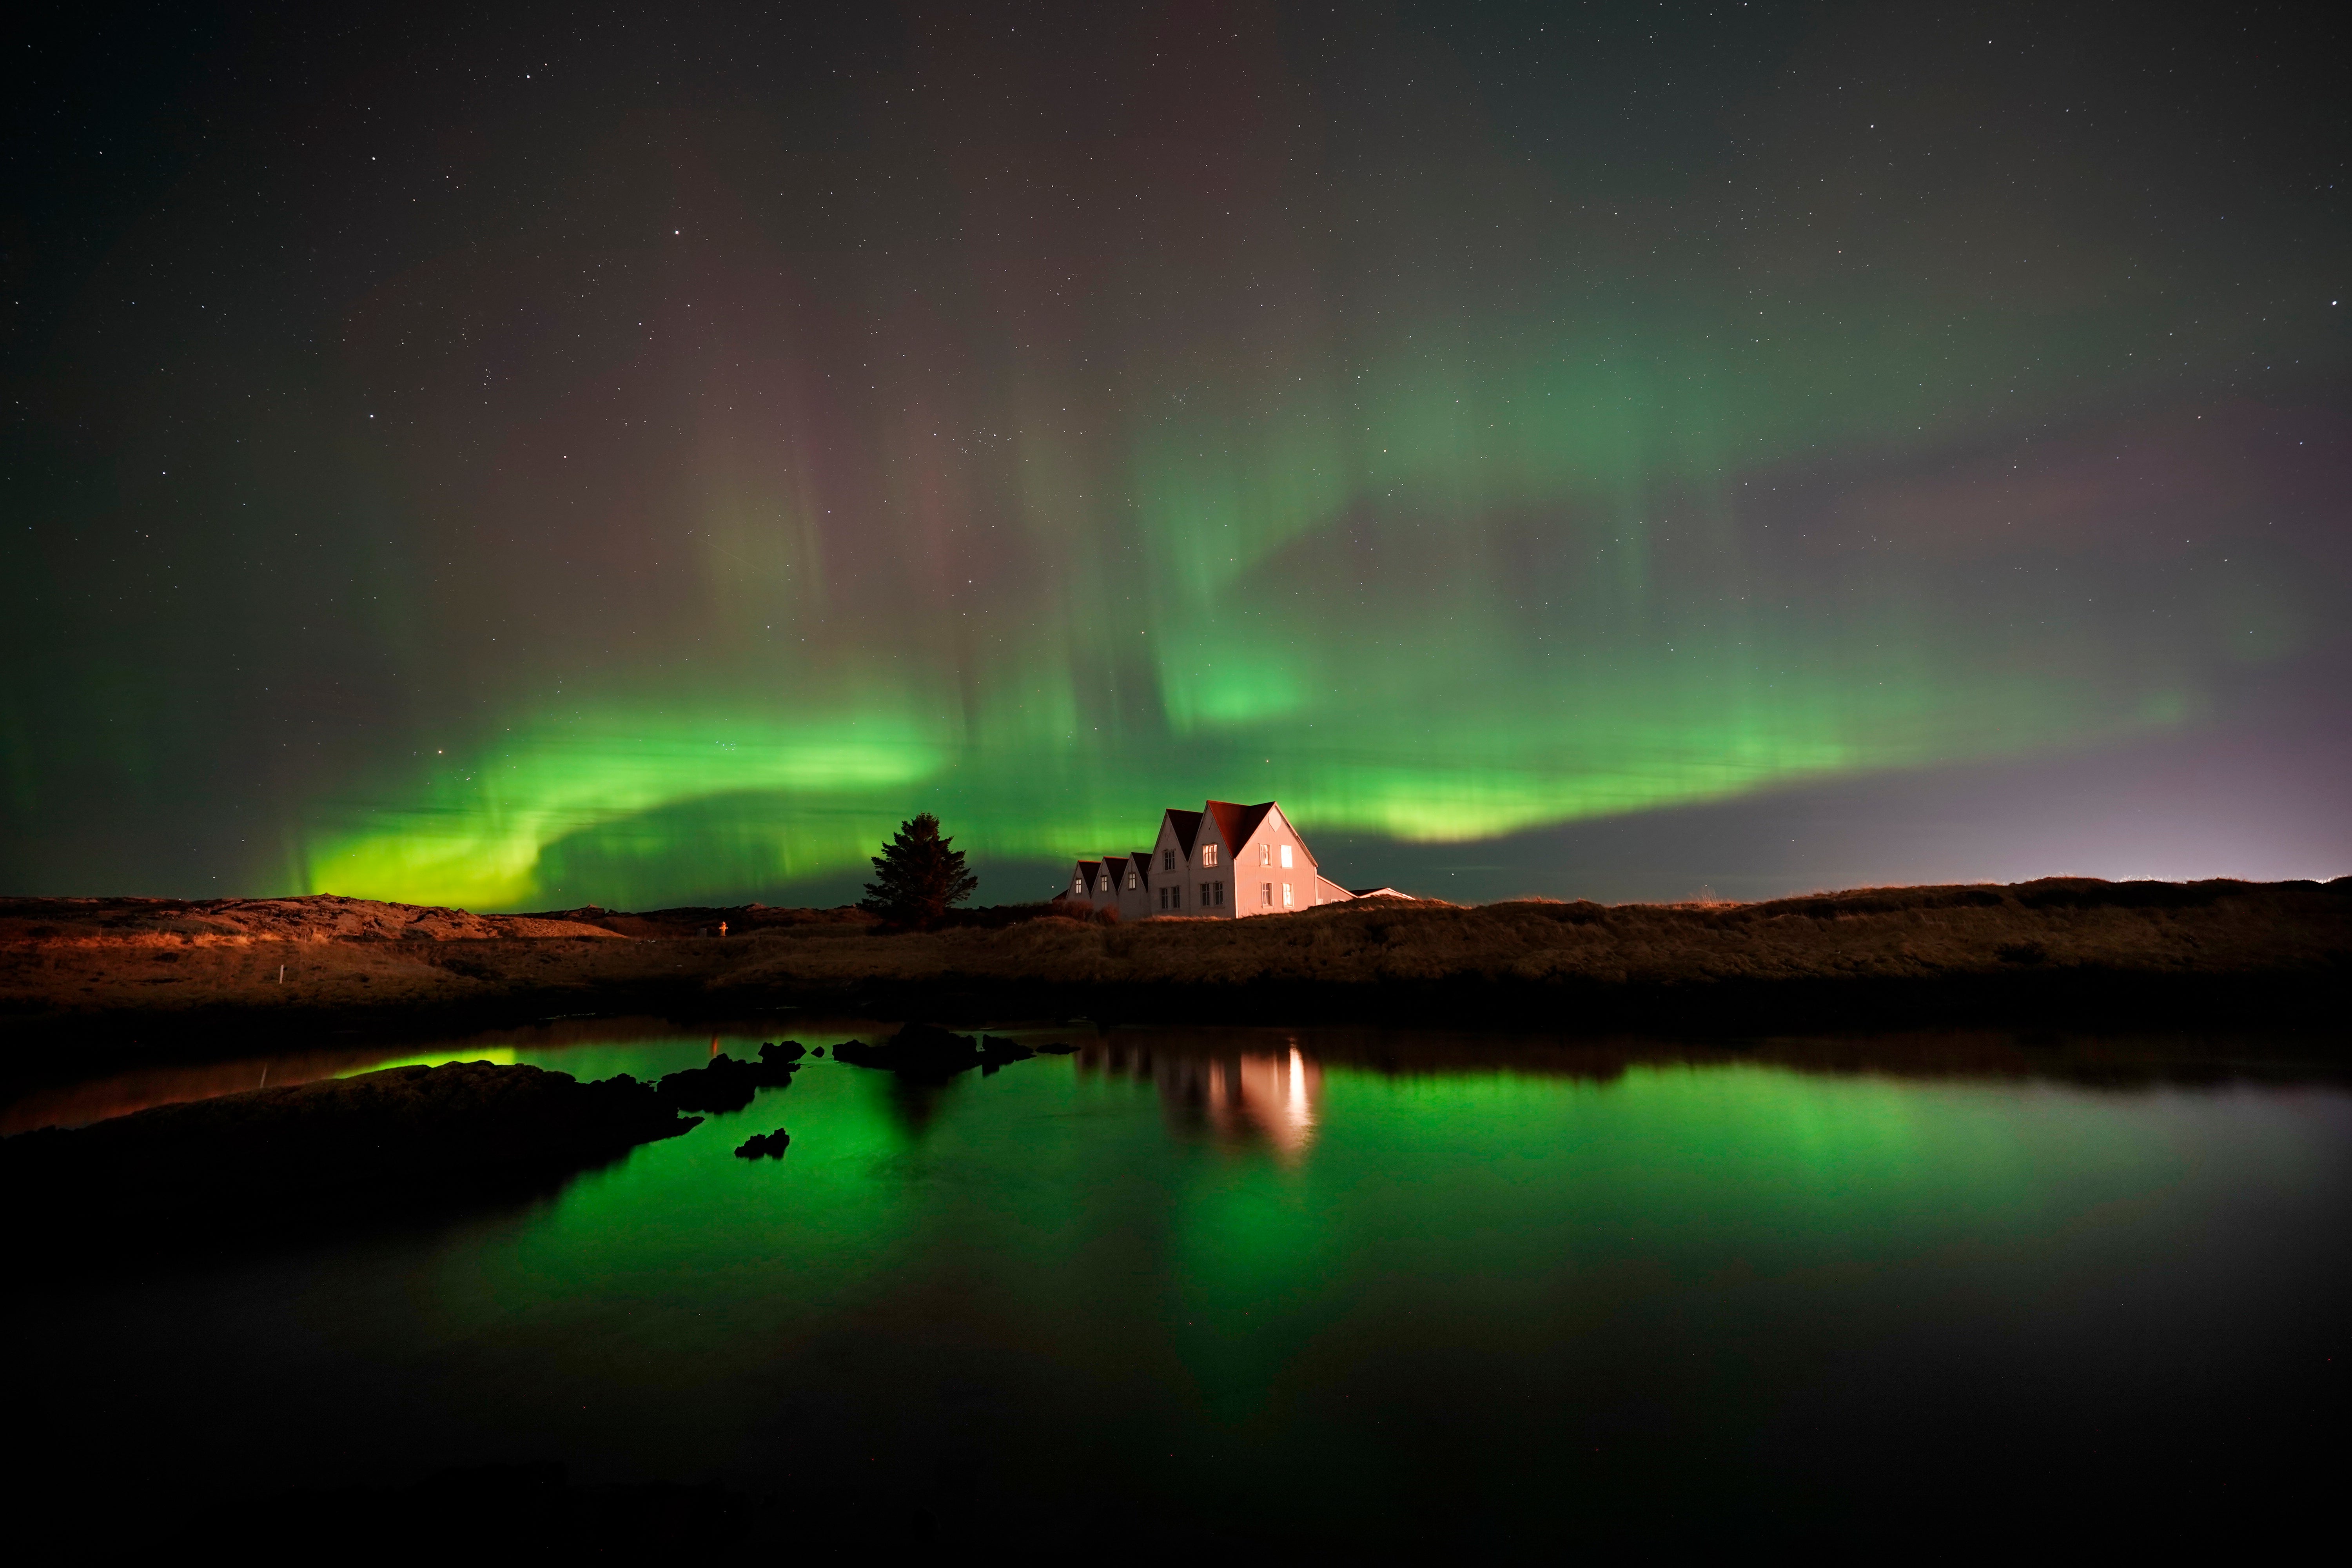 northern lights, aurora borealis, space, northern lights: will you be able to see aurora borealis tonight in the uk?